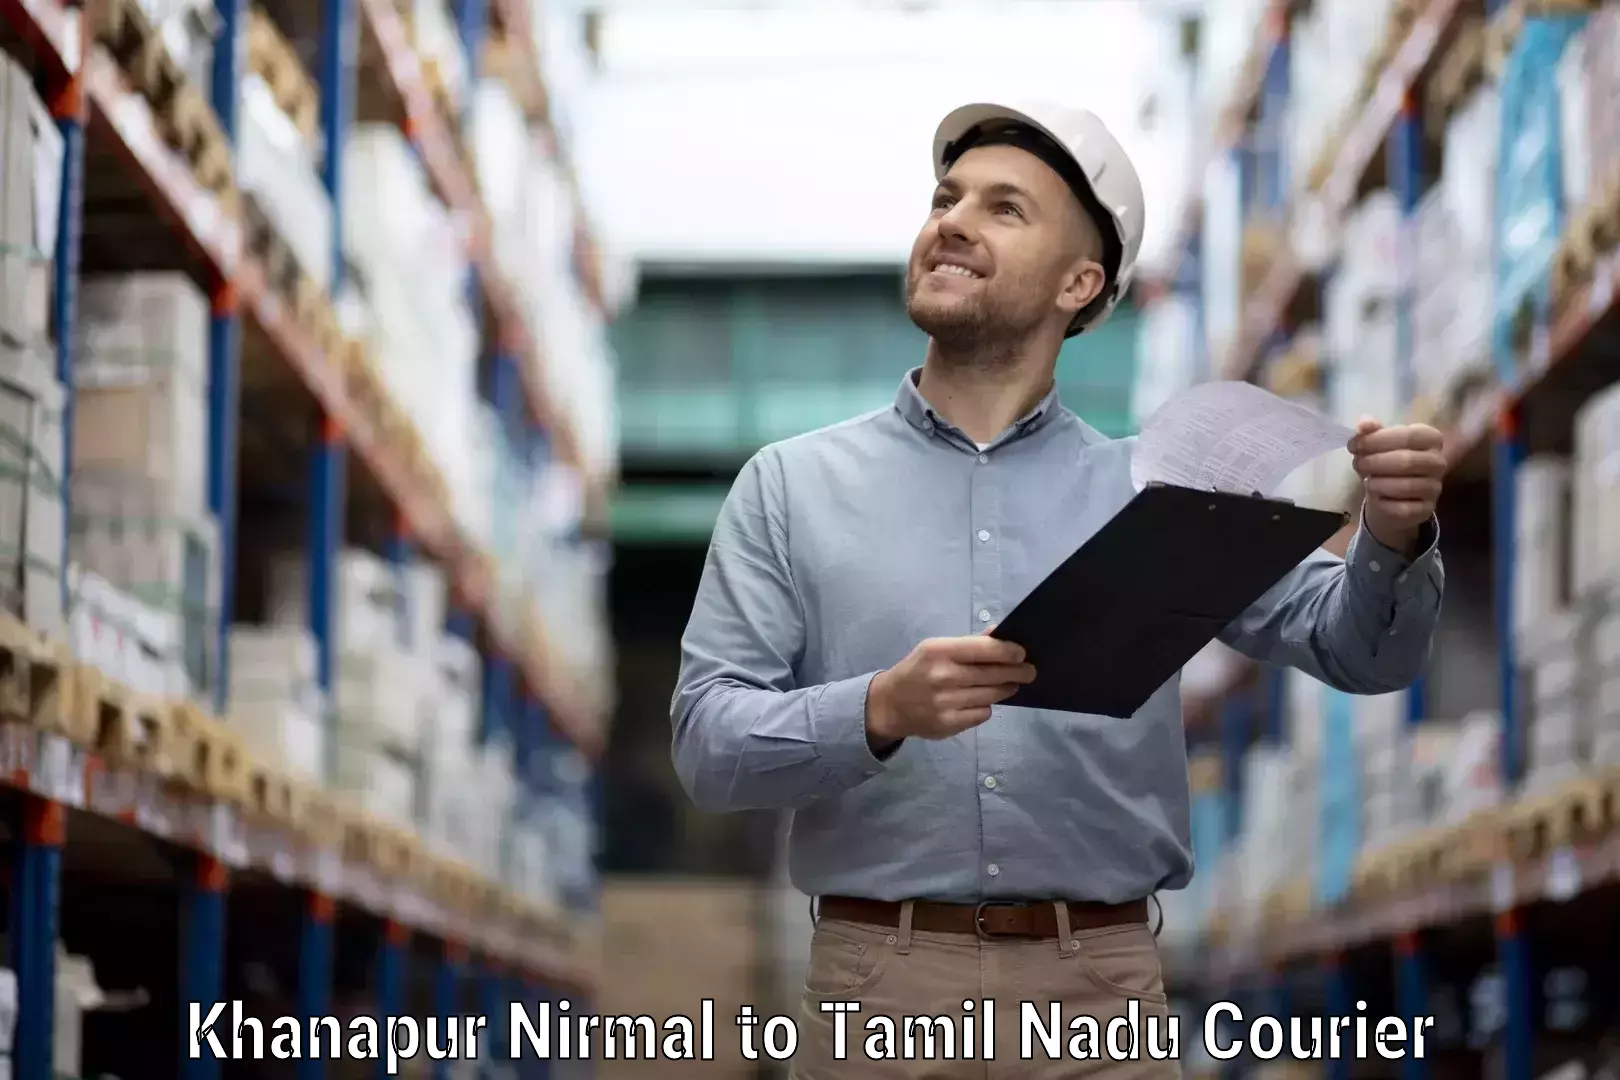 Parcel delivery Khanapur Nirmal to Nagercoil